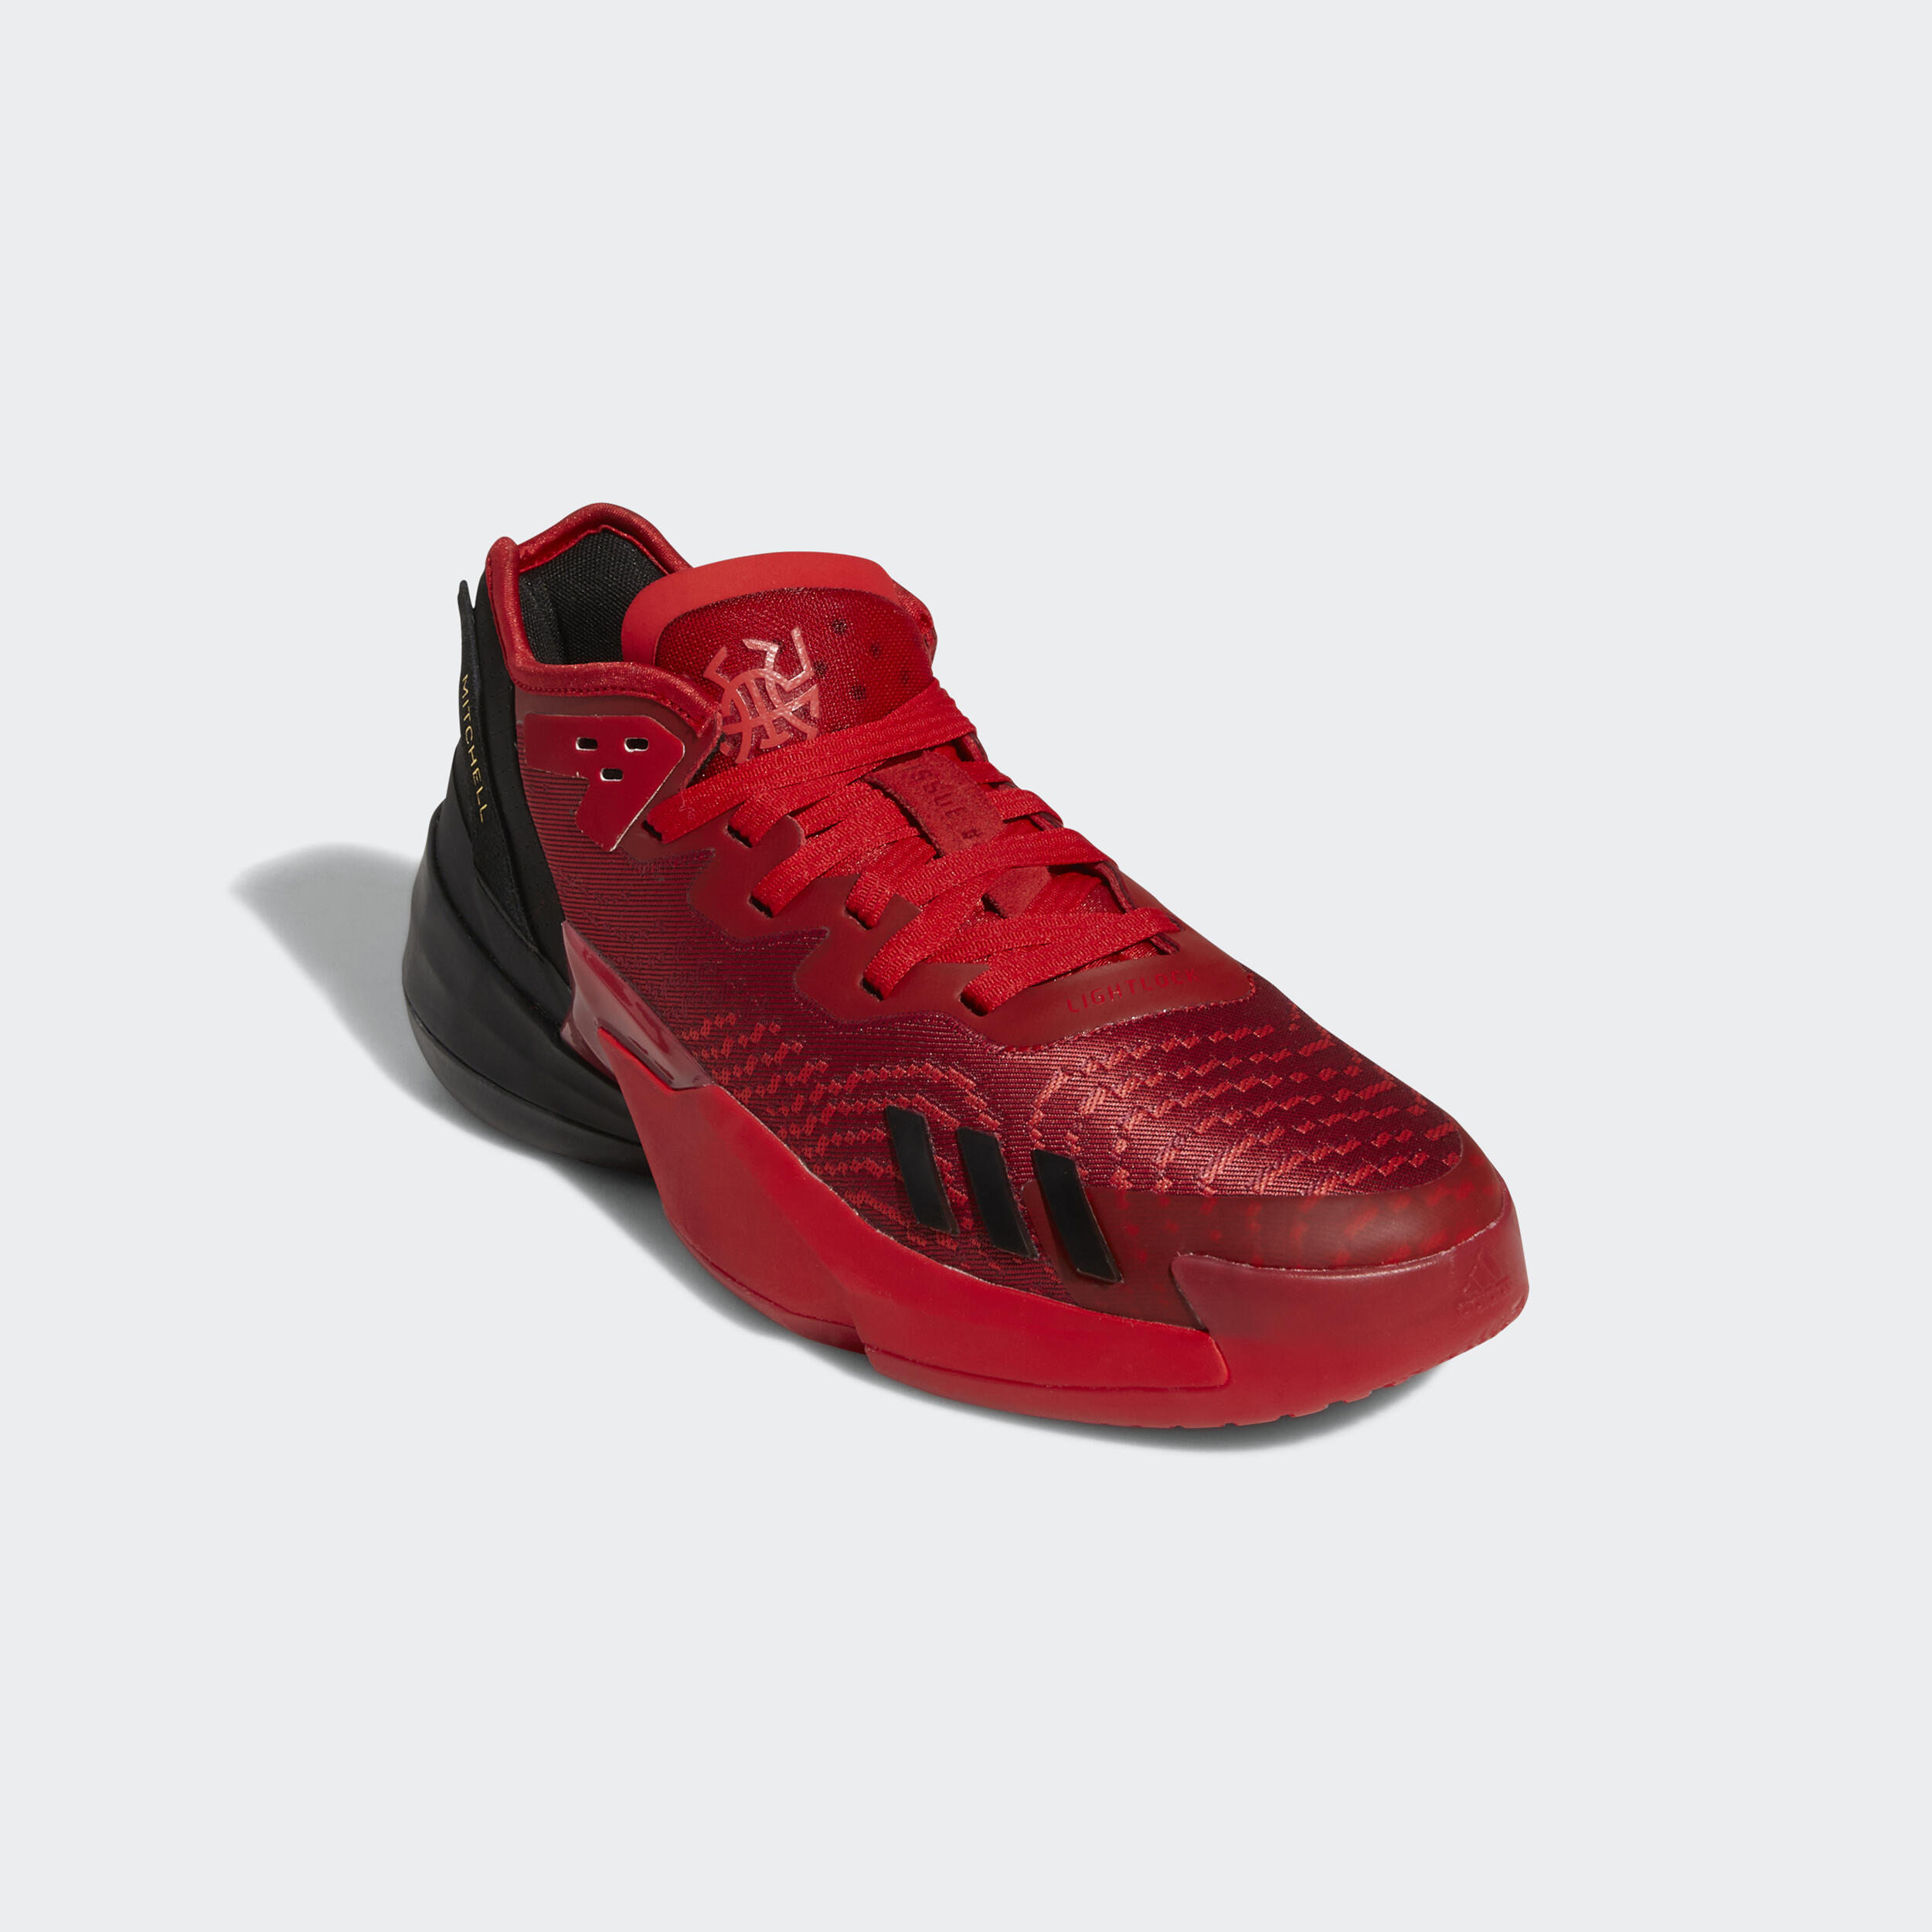 Men's Basketball Shoes D.O.N Issue 4 - Red/Black 2/4